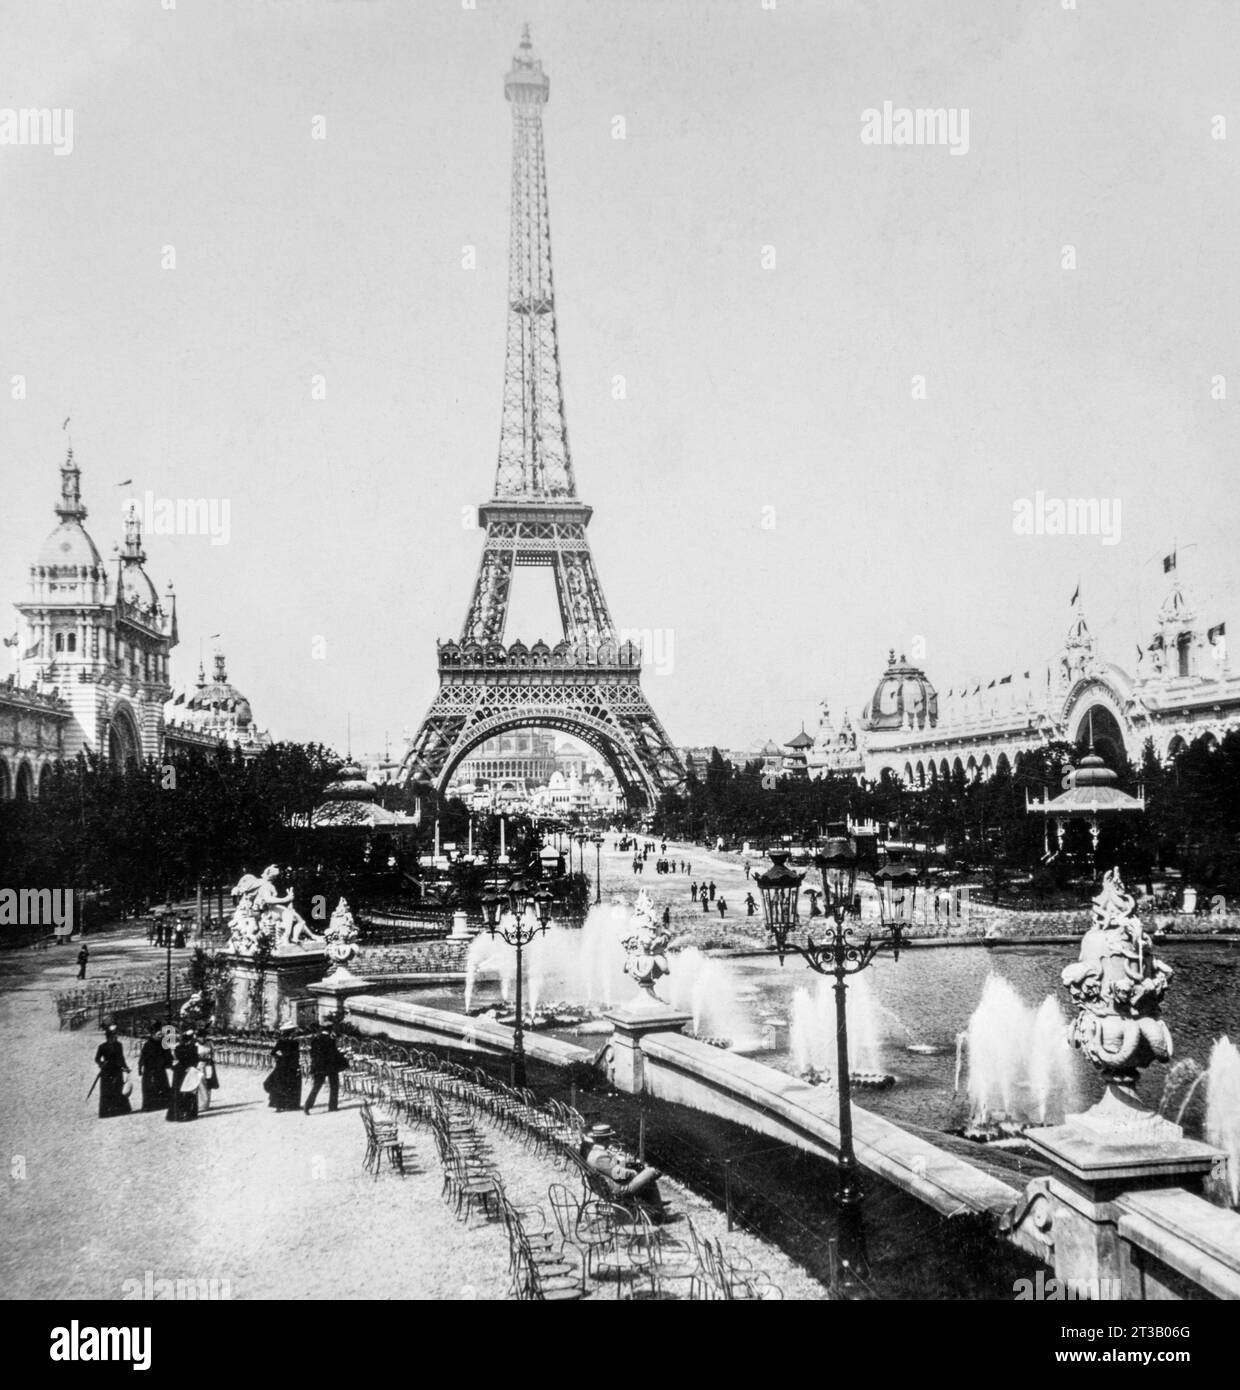 The Eiffel Tower seen from the Palais de l'Electricite during the 1900 Universal Exhibition in Paris Stock Photo